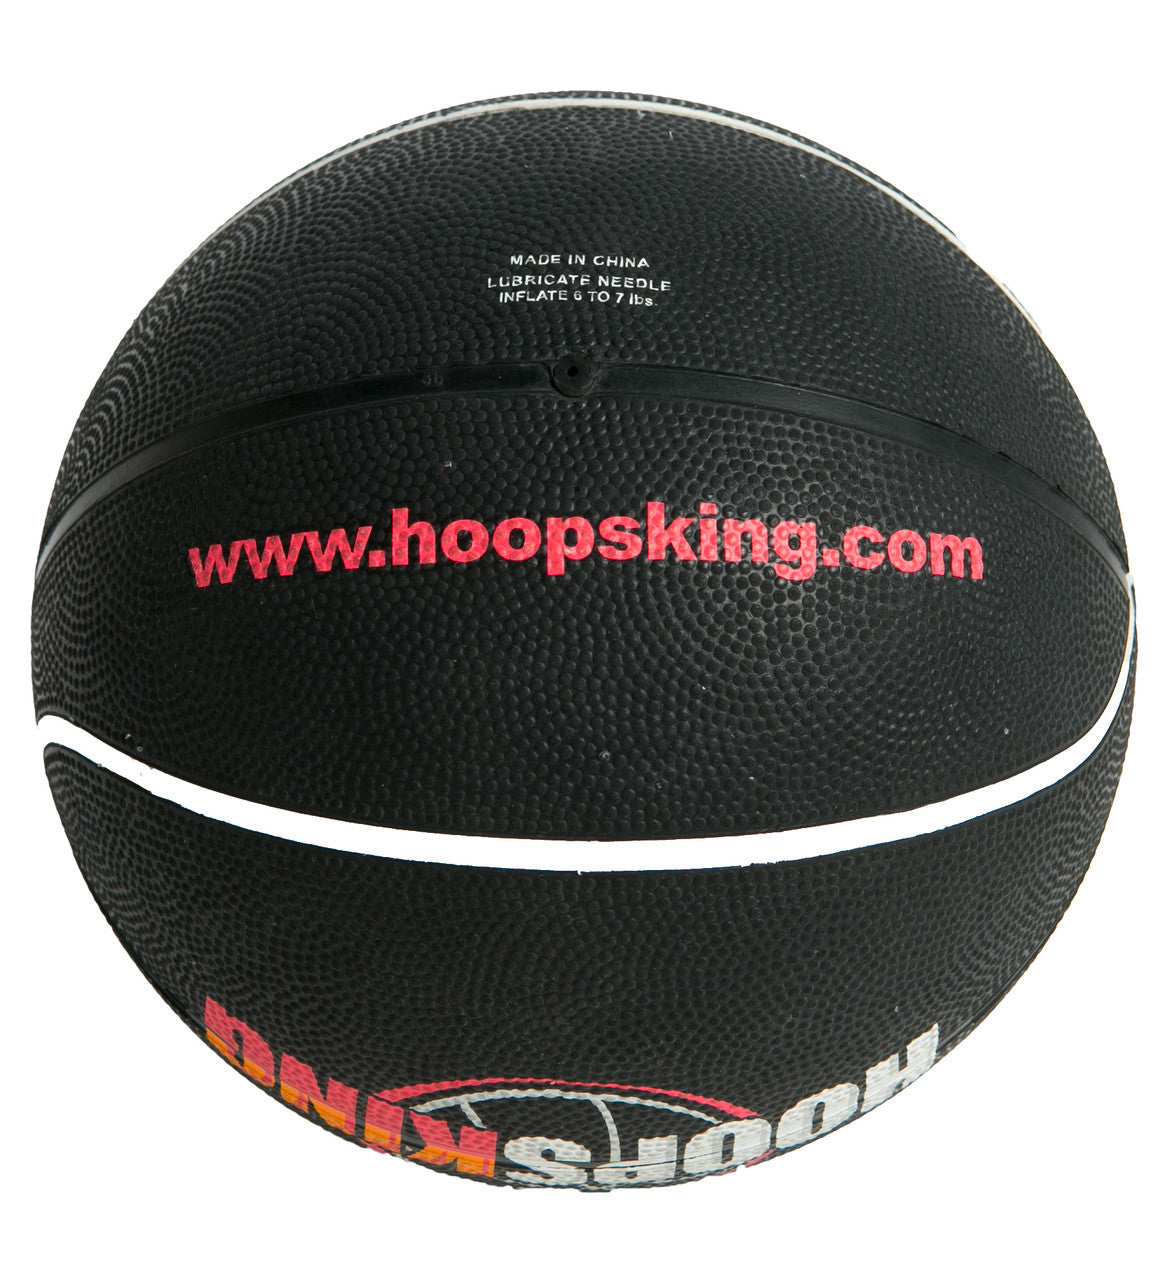 Weighted Basketball Team Pack (12 Balls), 29.5 or 28.5